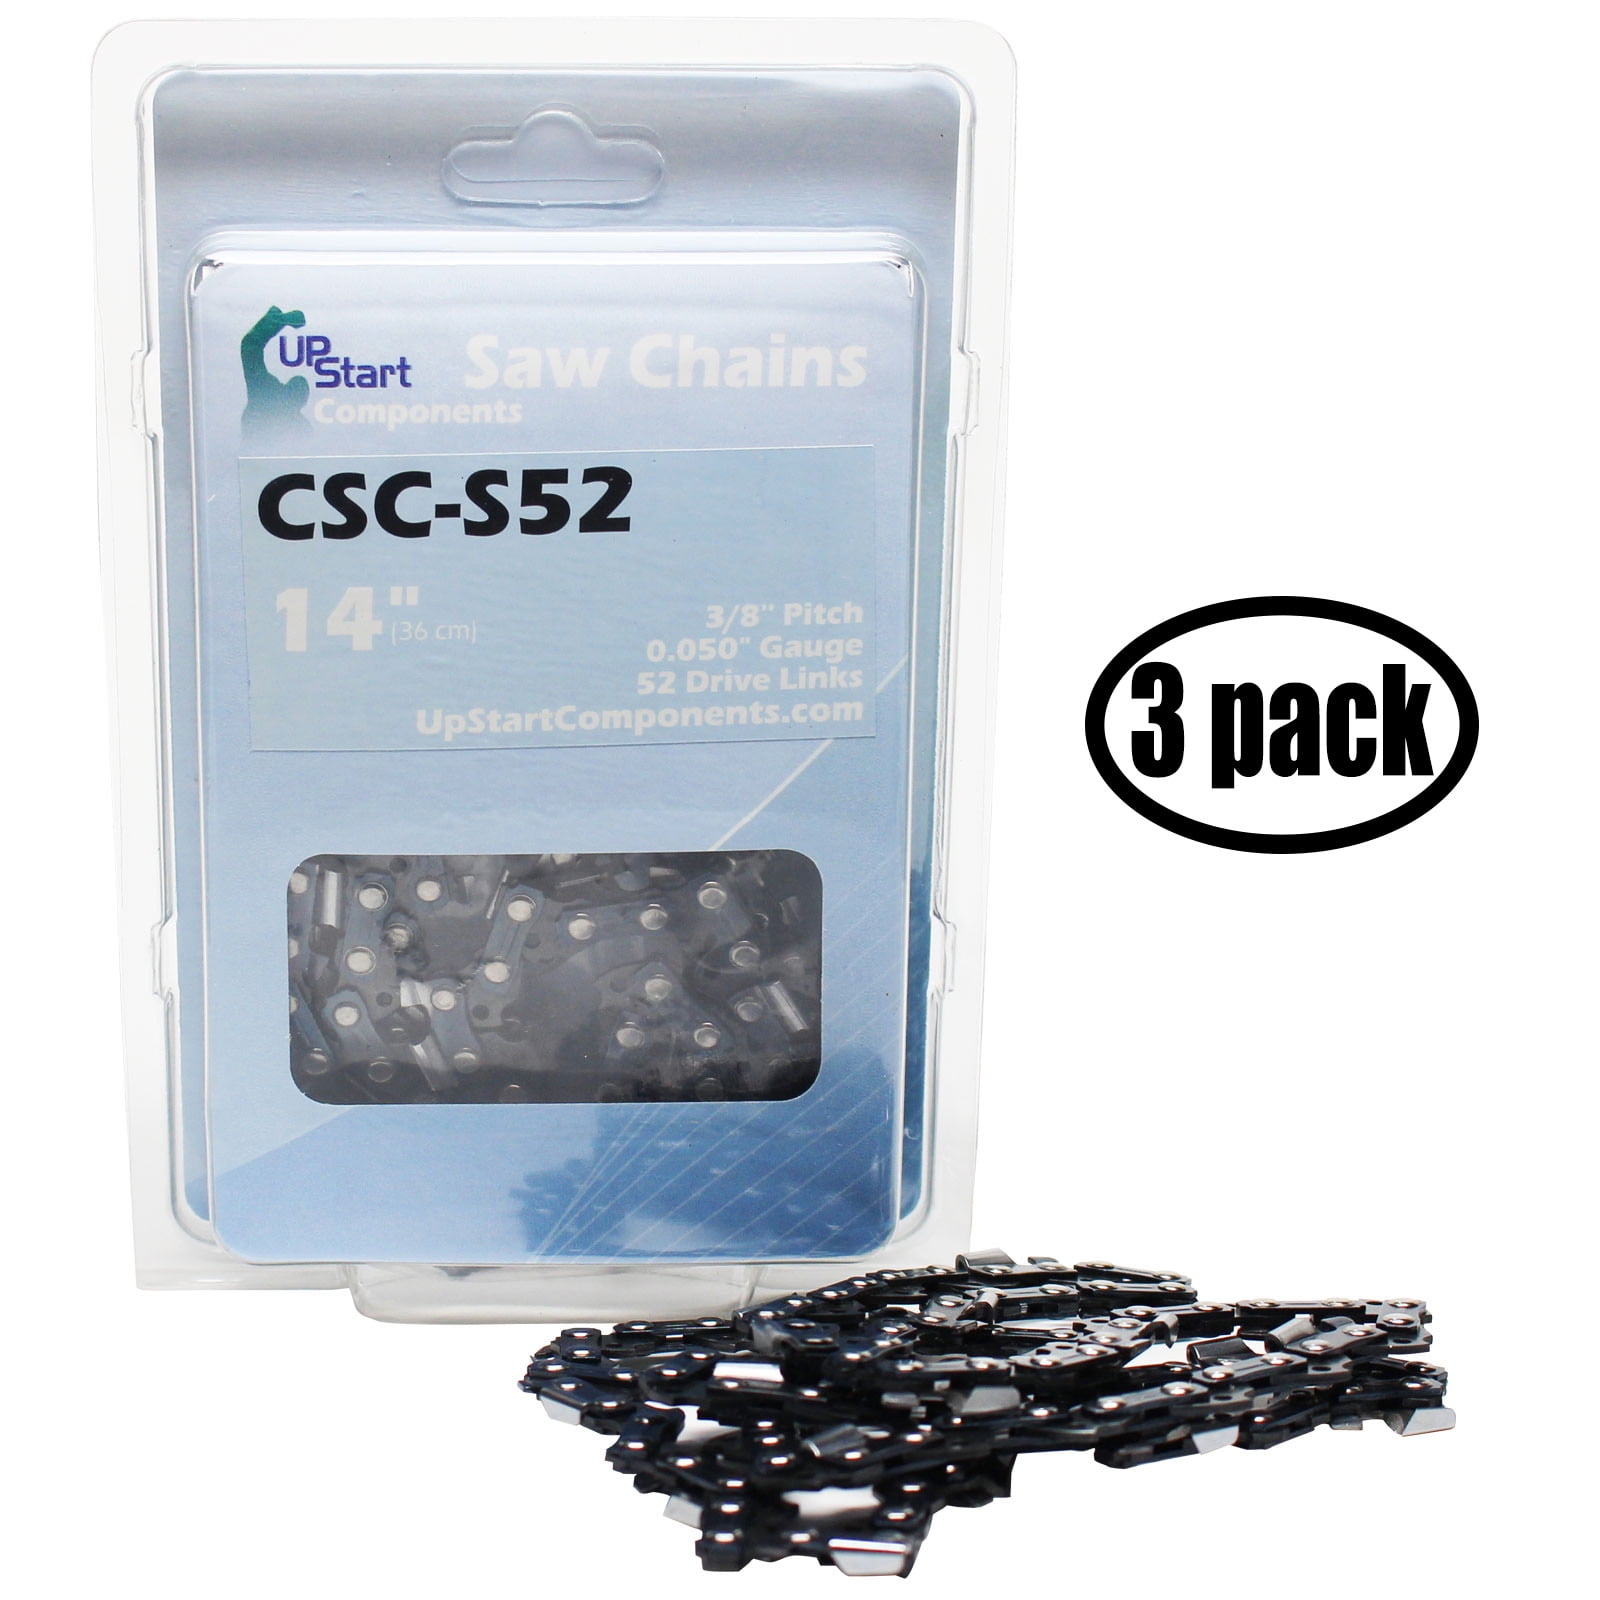 3 Pack Oregon VXL Semi-Chisel Chainsaw Chains Fits Red Max 14" Saw FREE Shipping 